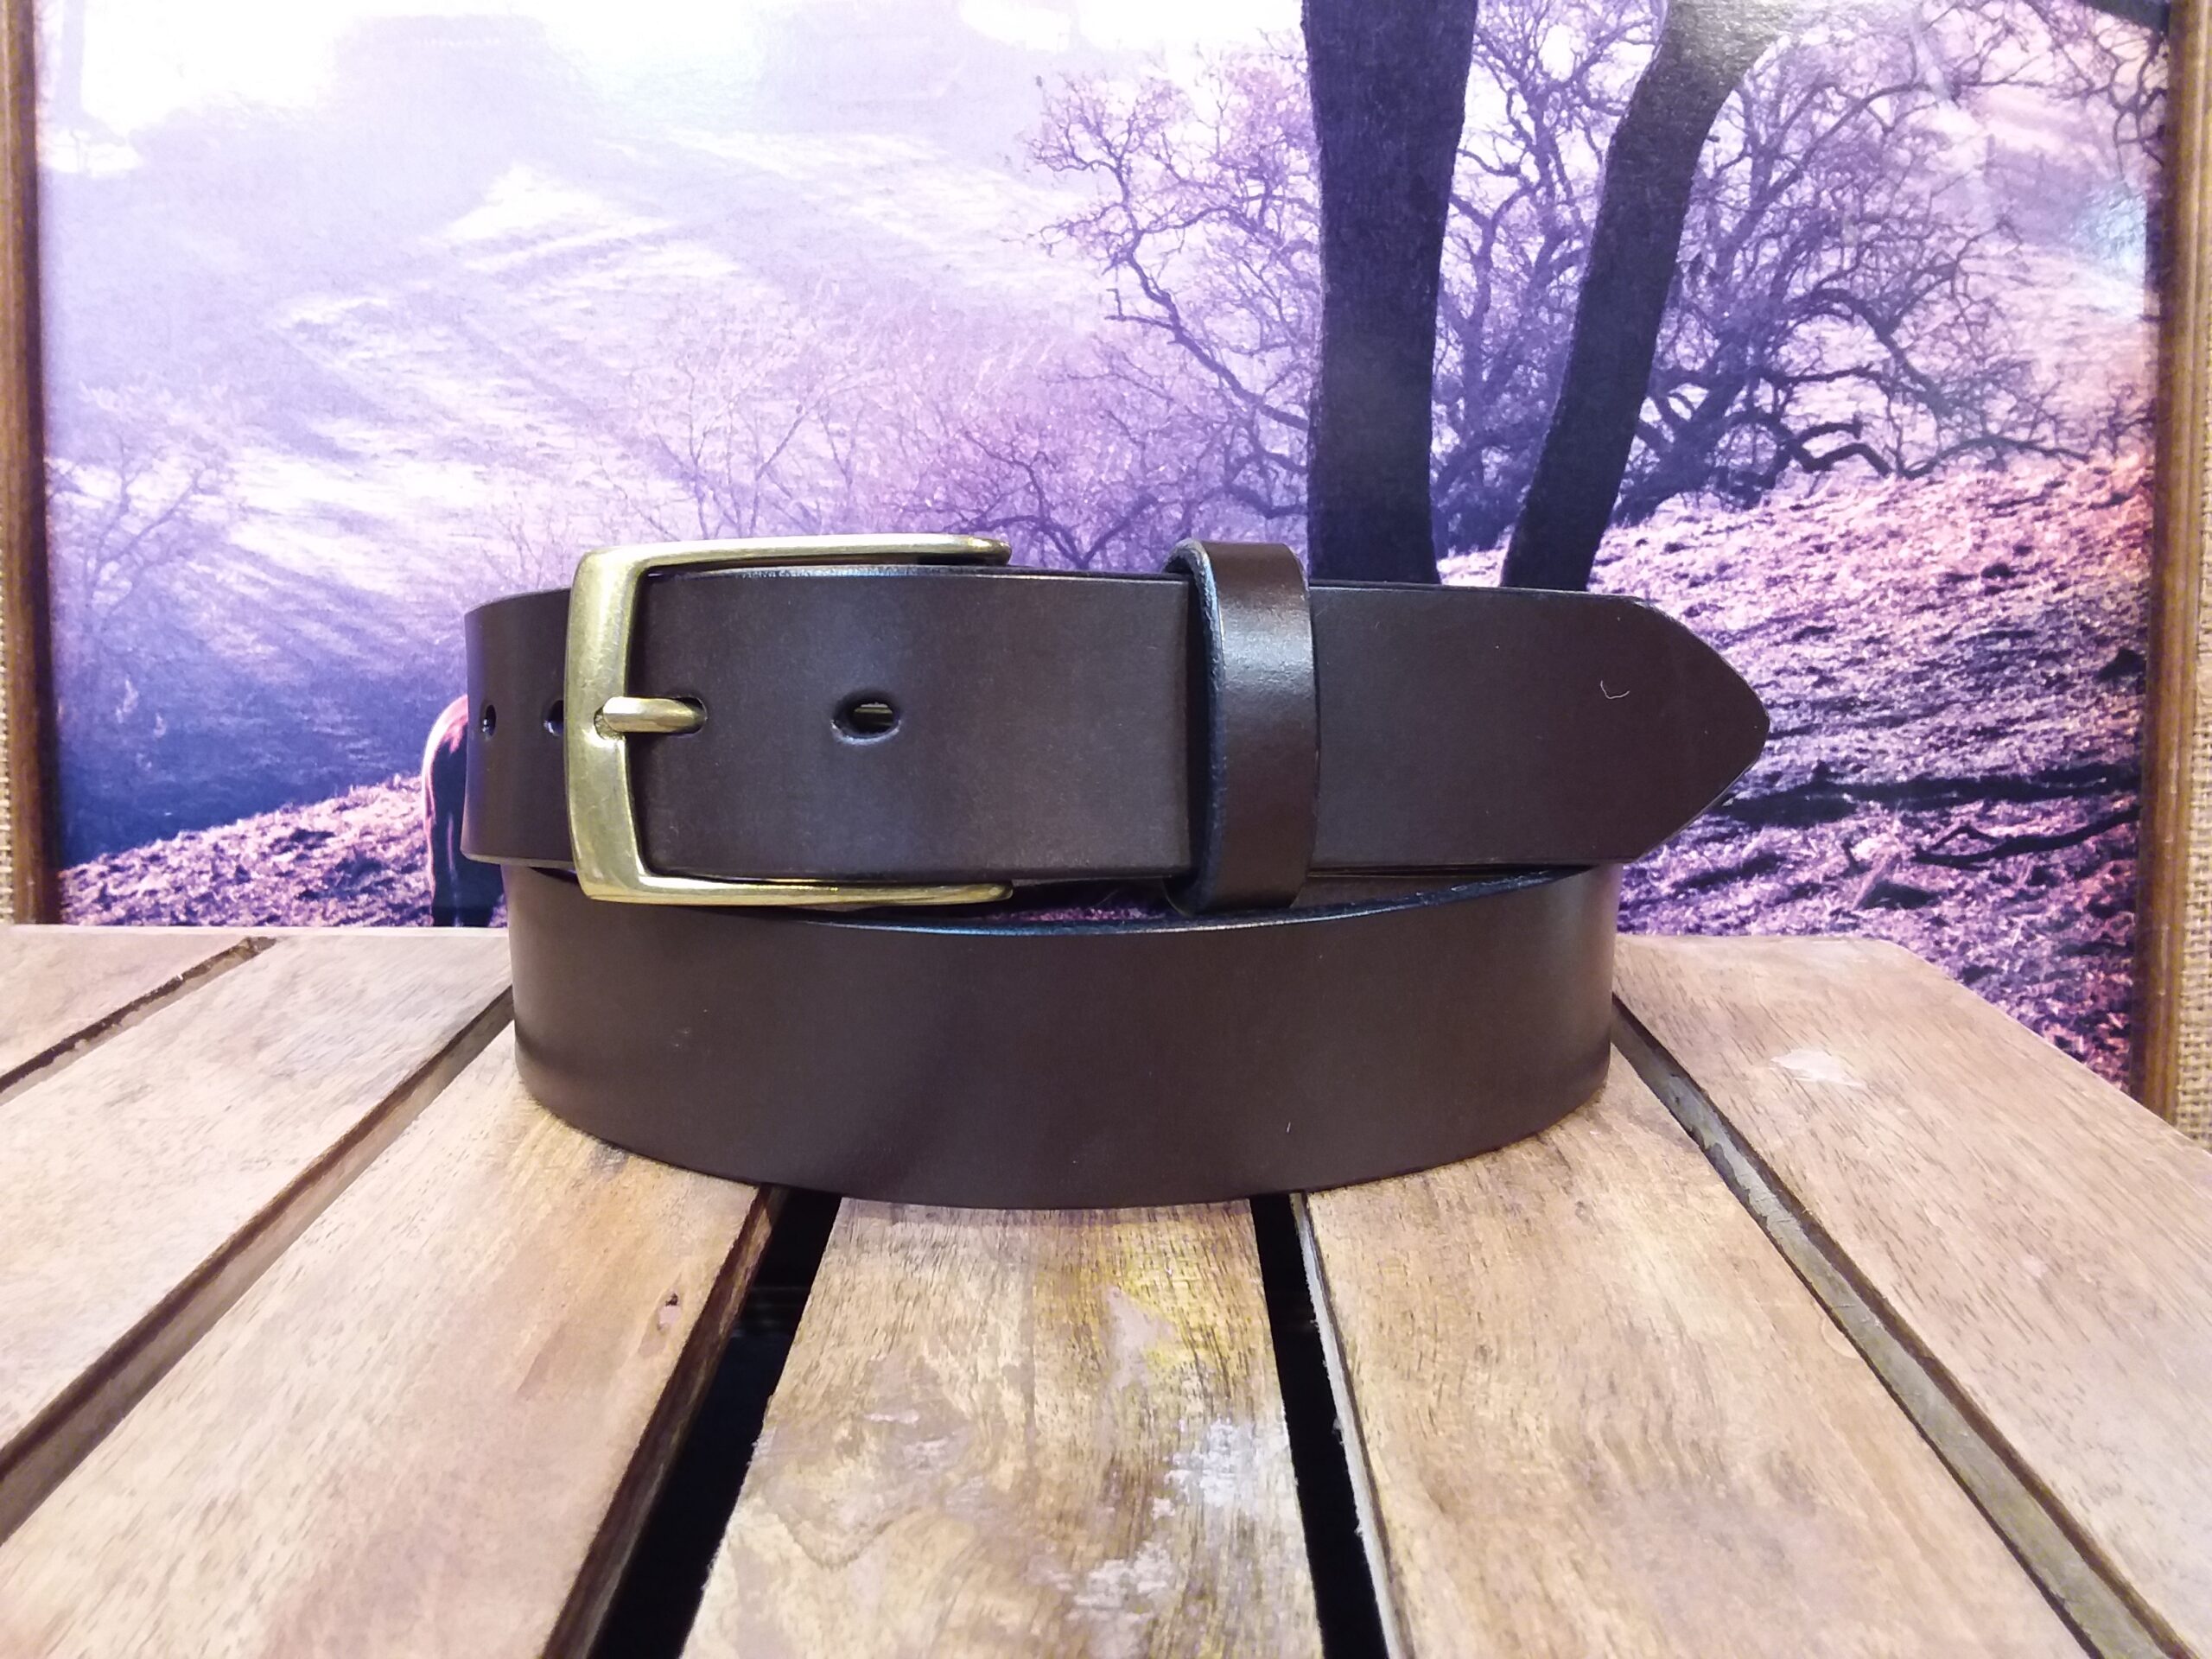 Fine Leather Men's Dress Belt Handcrafted from Bridle Leather.